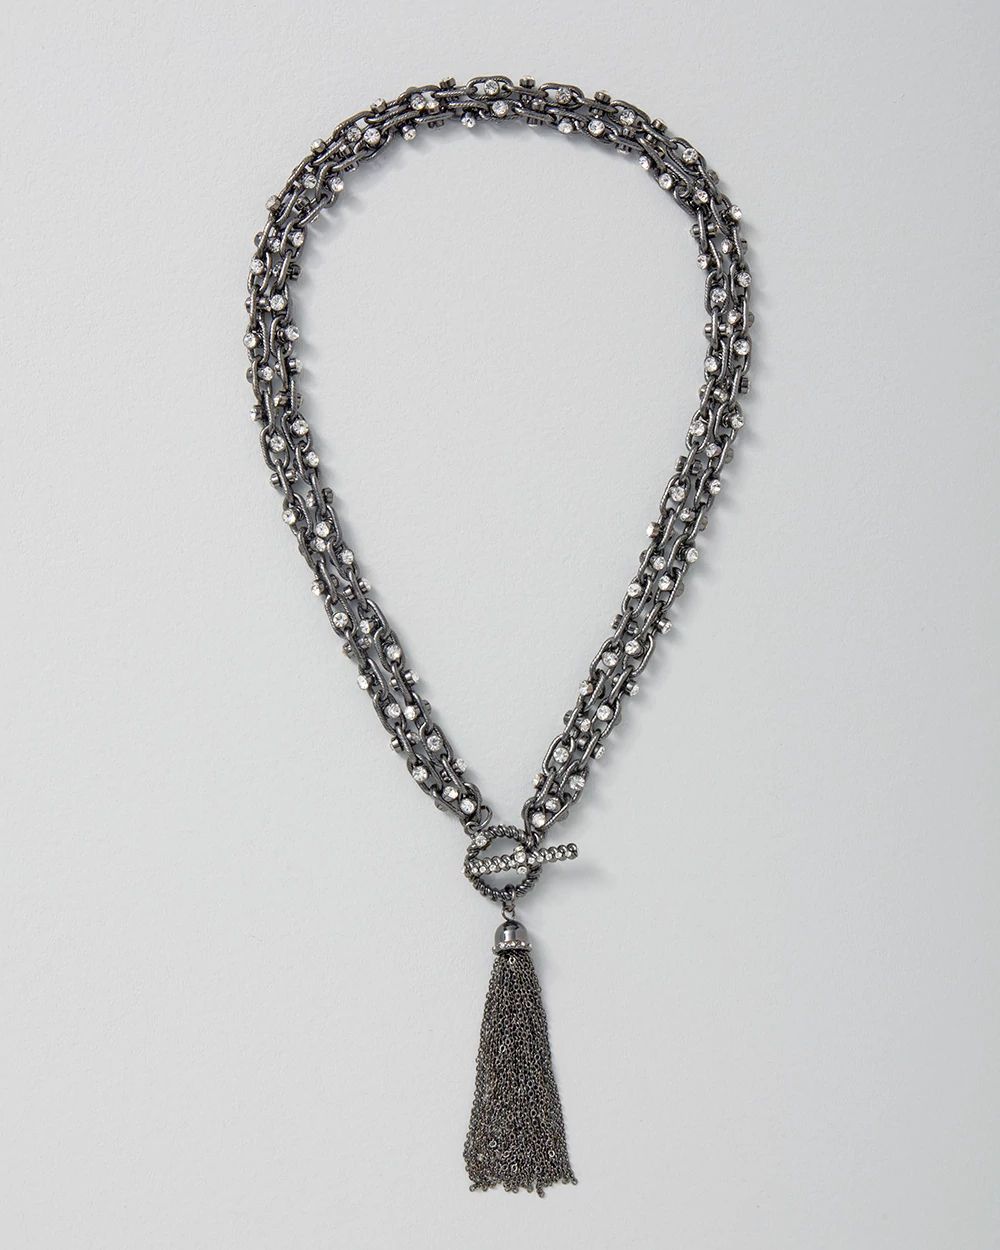 Hematite Convertible Tassel Necklace click to view larger image.